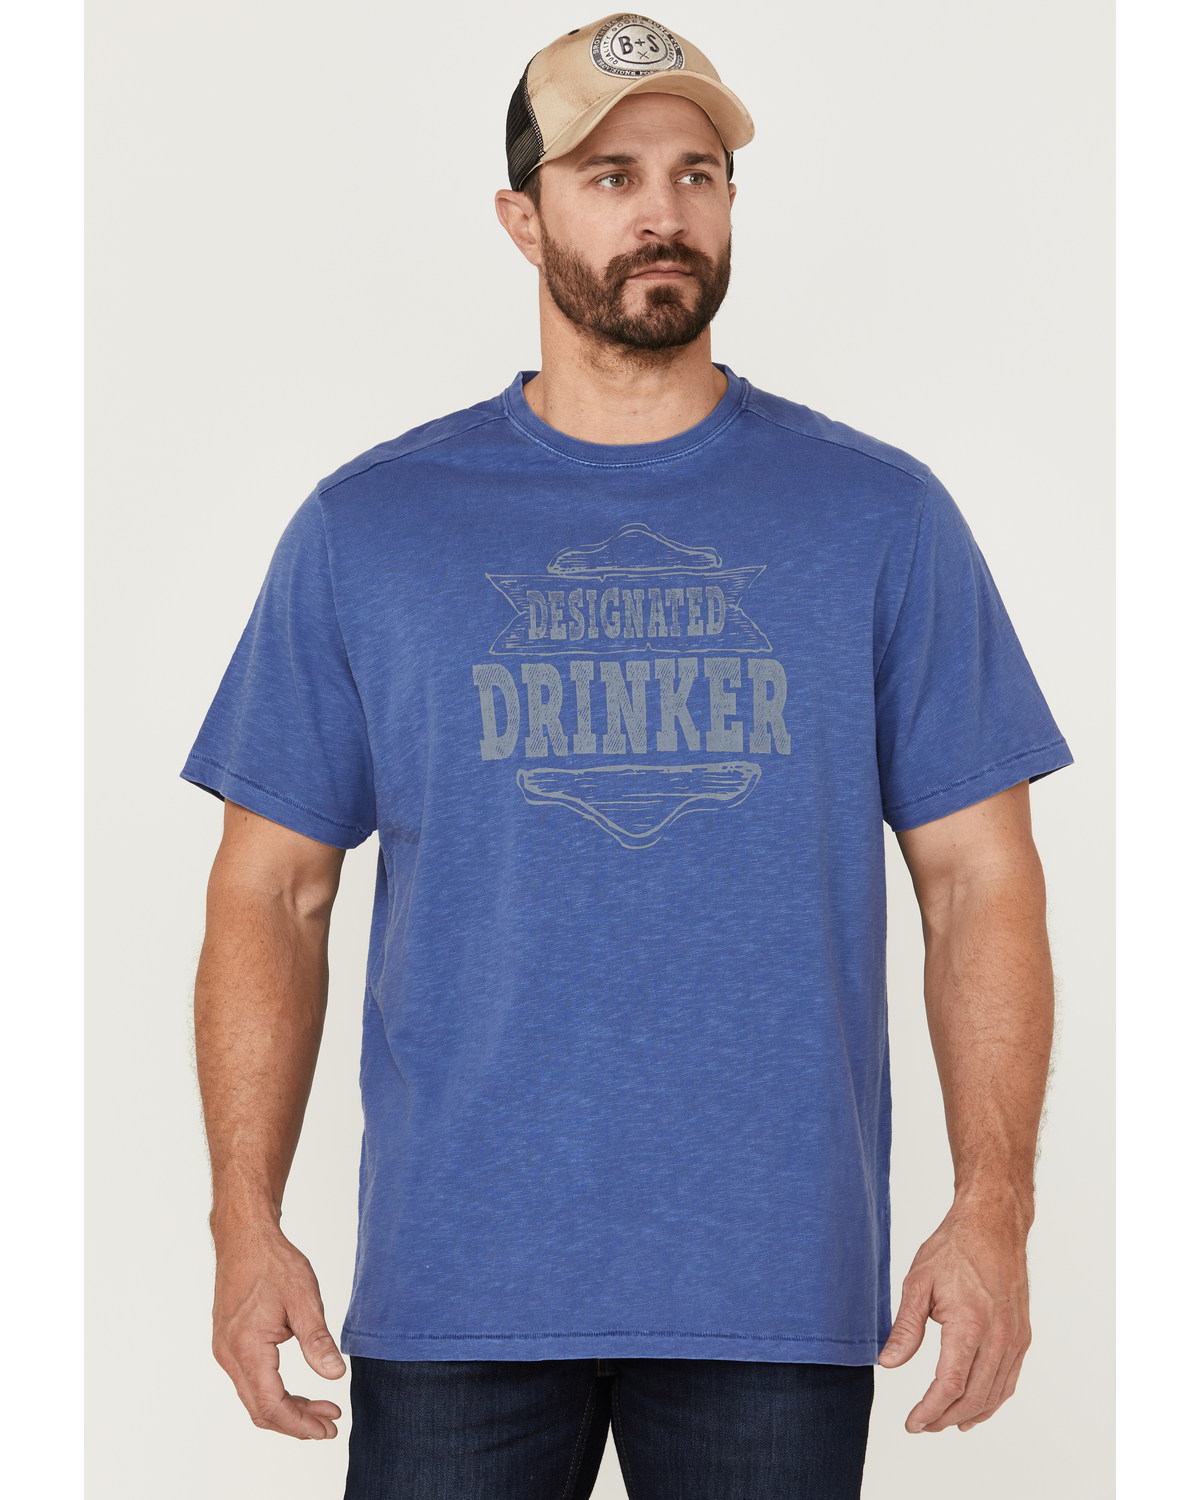 Brothers and Sons Men's Designated Drinker Graphic Short Sleeve T-Shirt